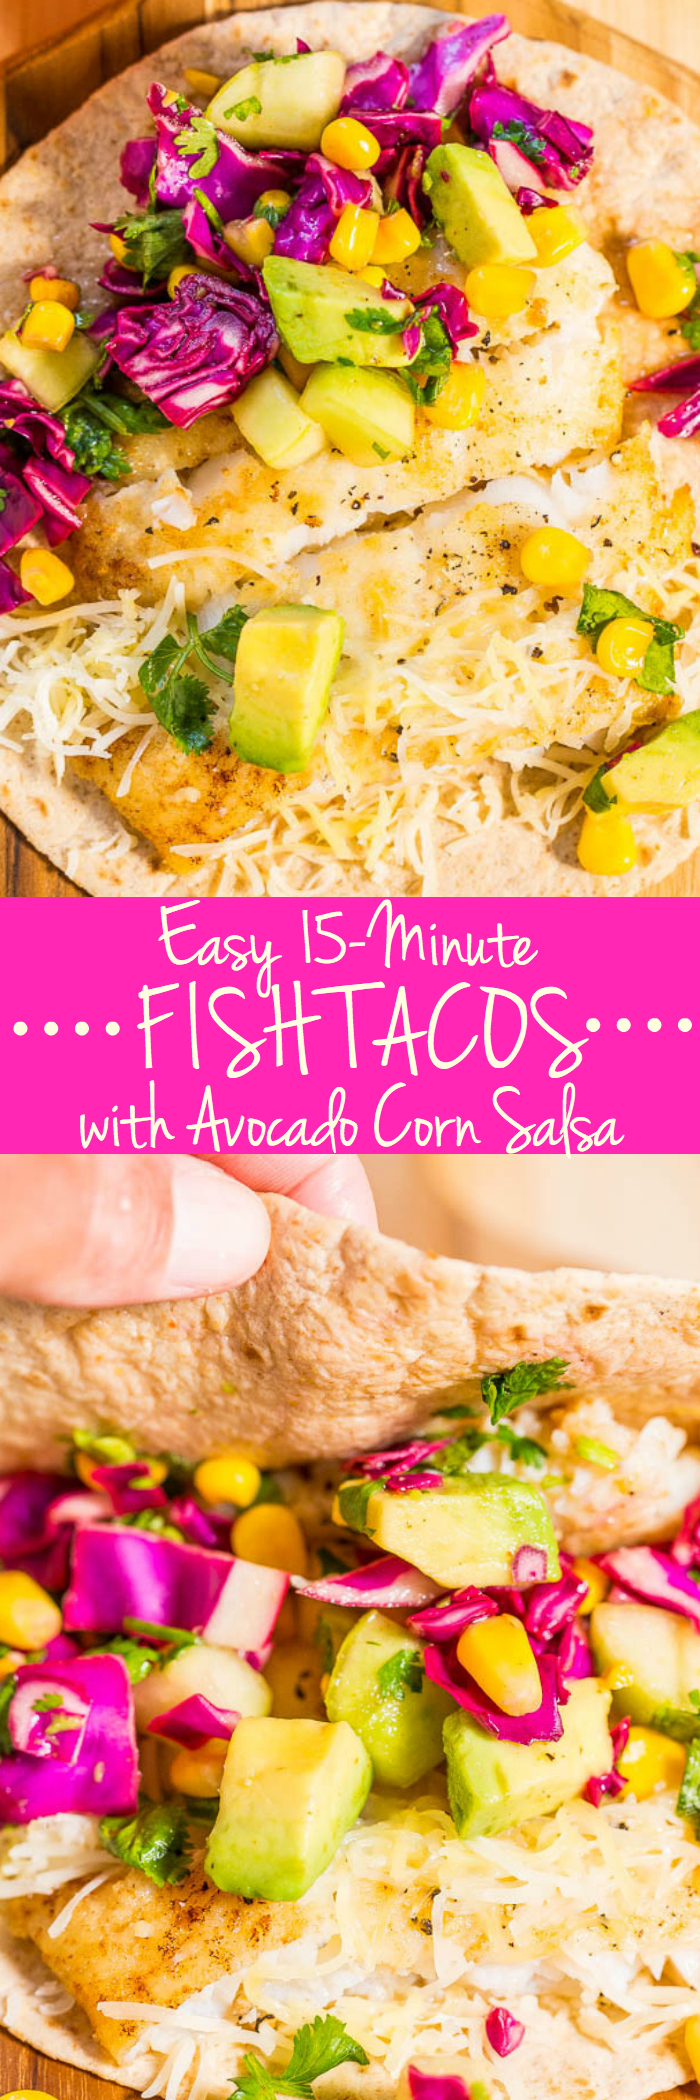 15-Minute Tilapia Fish Tacos with Corn Salsa — Tons of big flavors in a fast, fresh, and healthy meal!! A clean-eating taco recipe that tastes like comfort food!